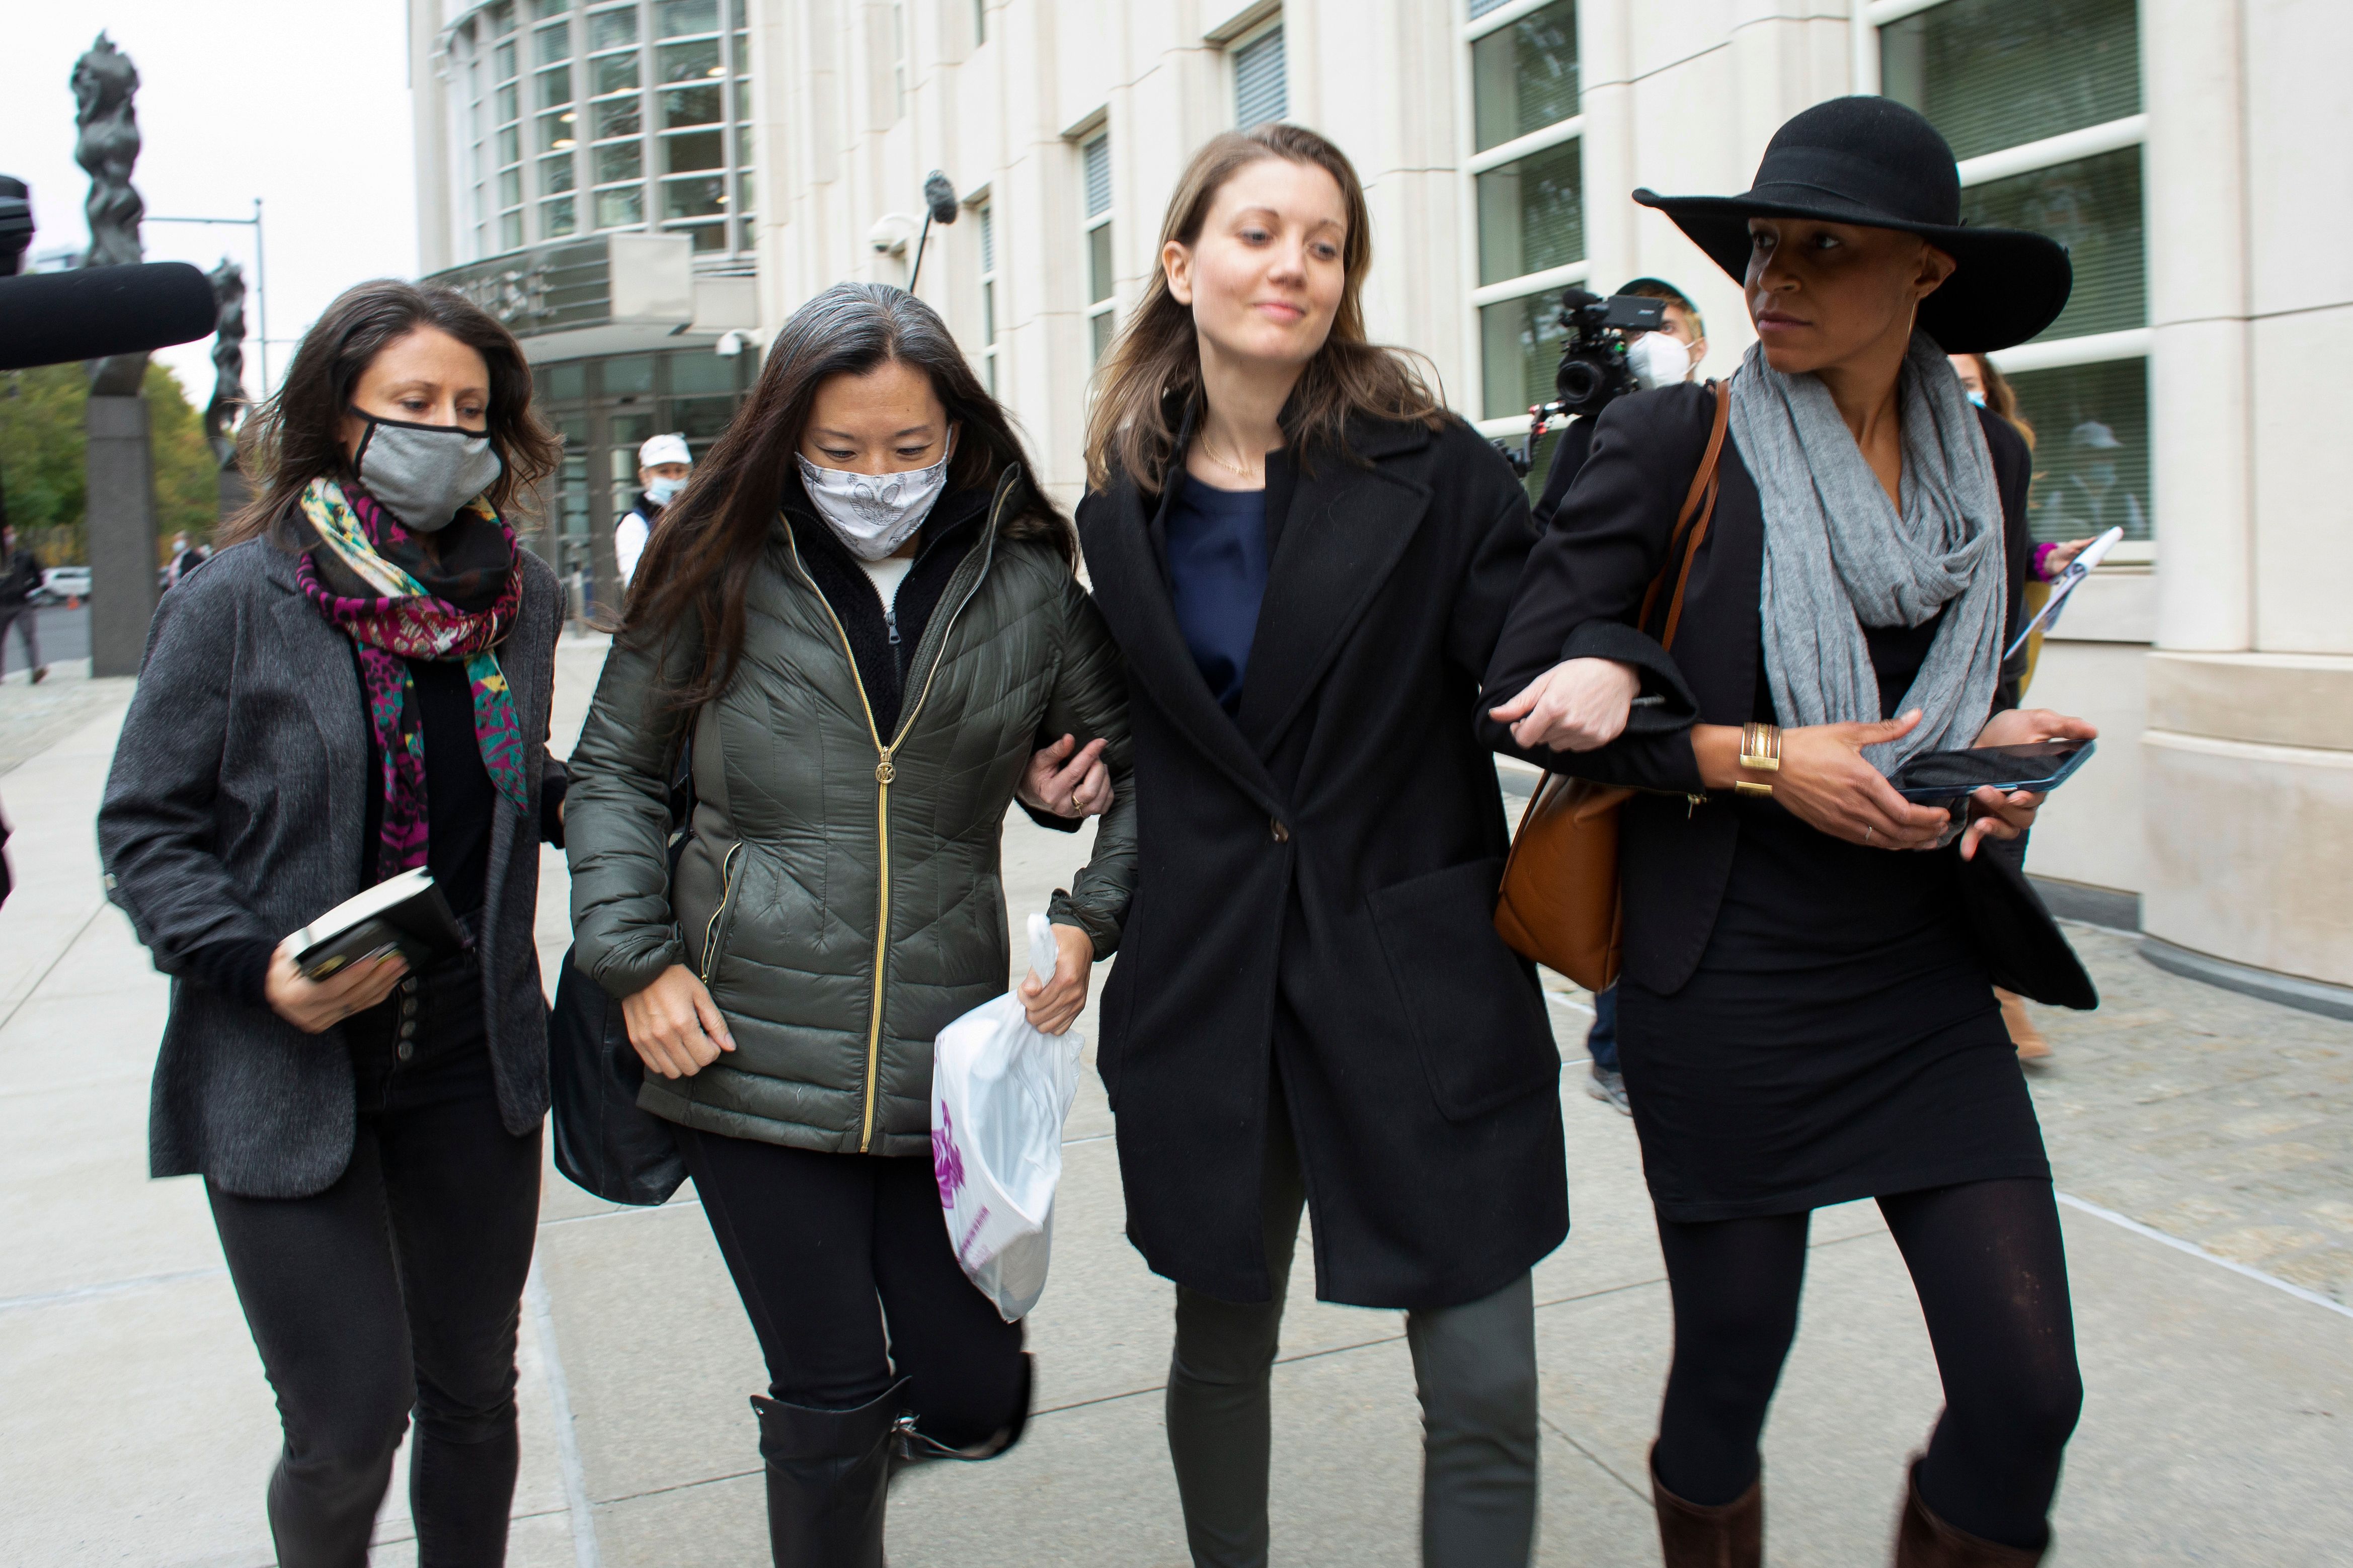 Nicki Clyne and others leave the New York court after Keith Rainiere was sentenced to 120 years in prison on October 27, 2020 | Photo: Kena Betancur/AFP/Getty Images